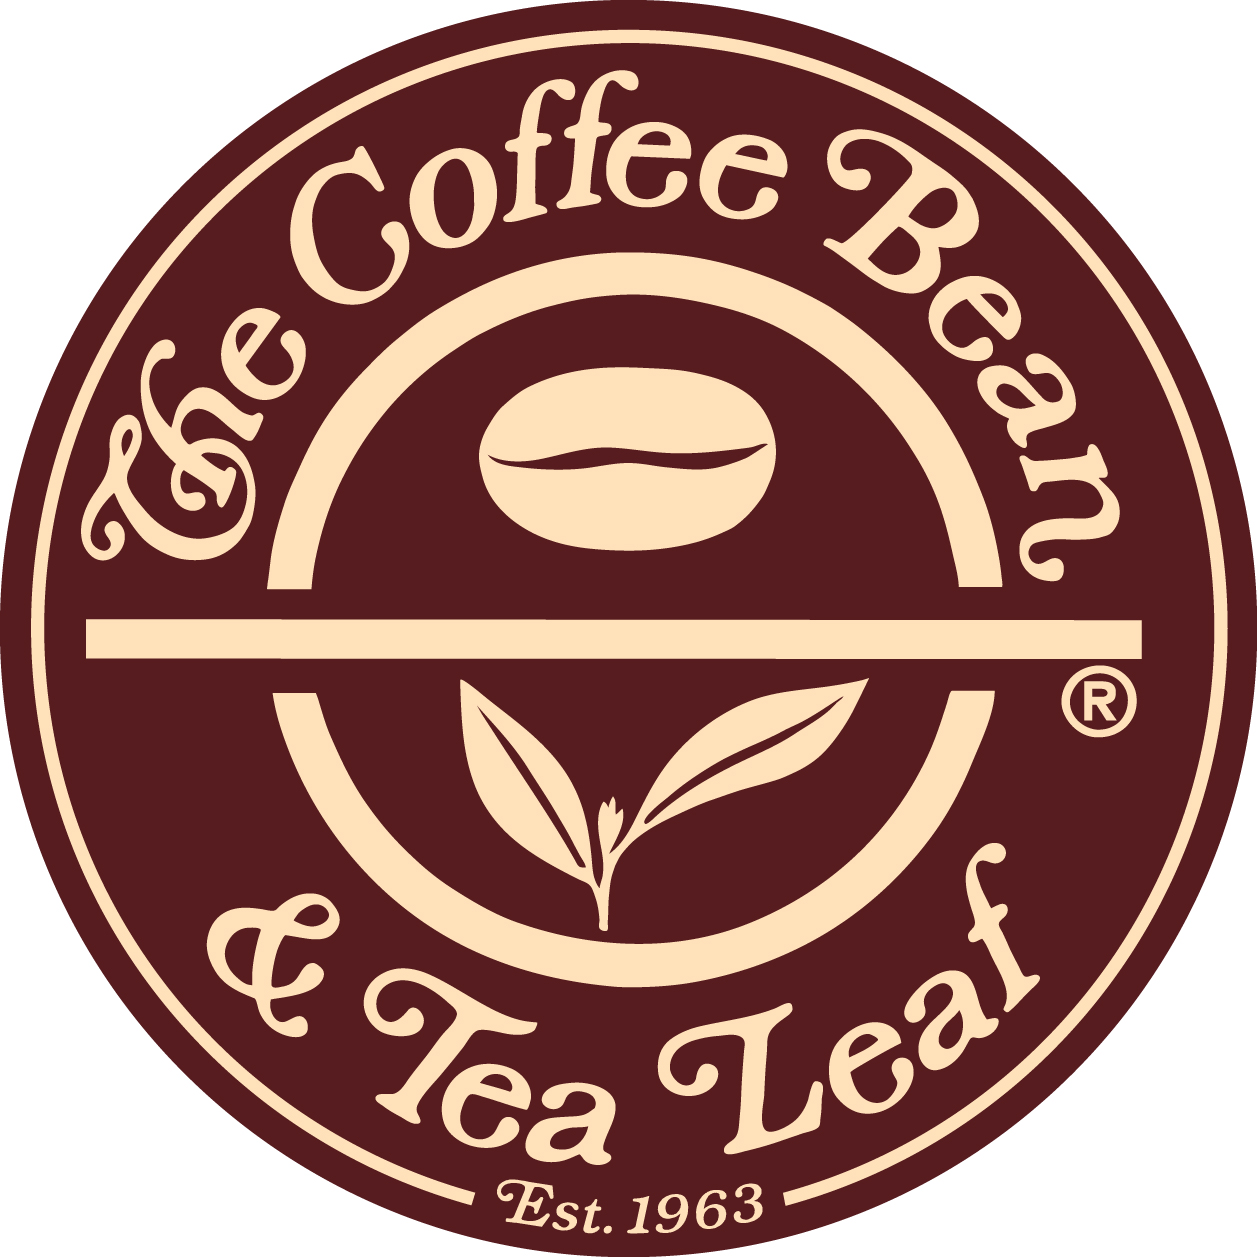 Amazing The Coffee Bean And Tea Leaf Pictures & Backgrounds